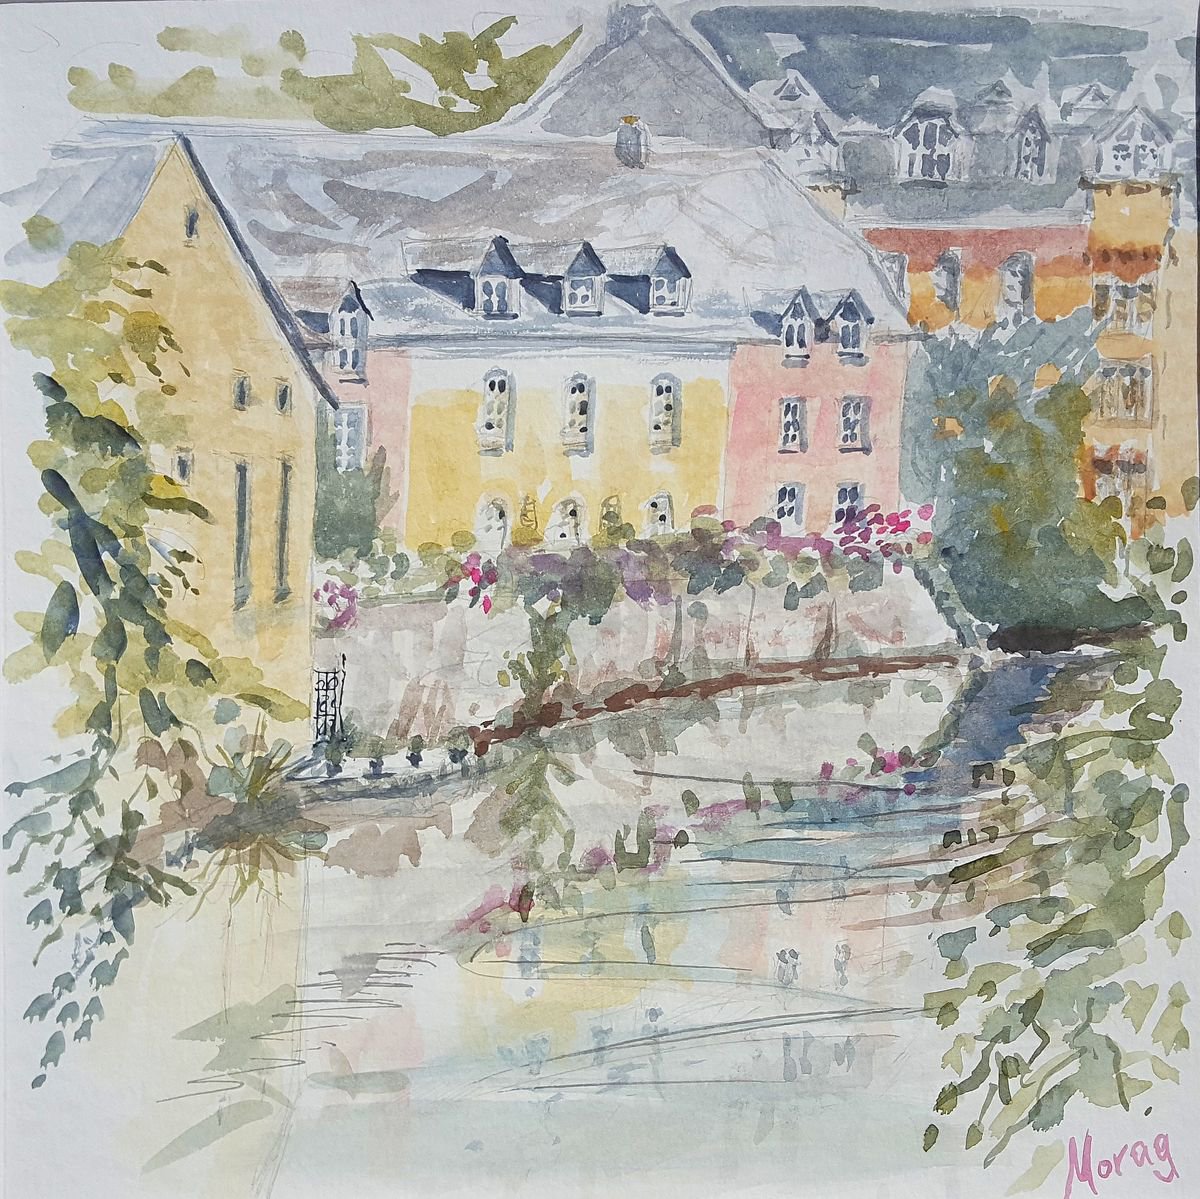  - Colourful Houses by the River - � Grond, Luxembourg by Morag Paul